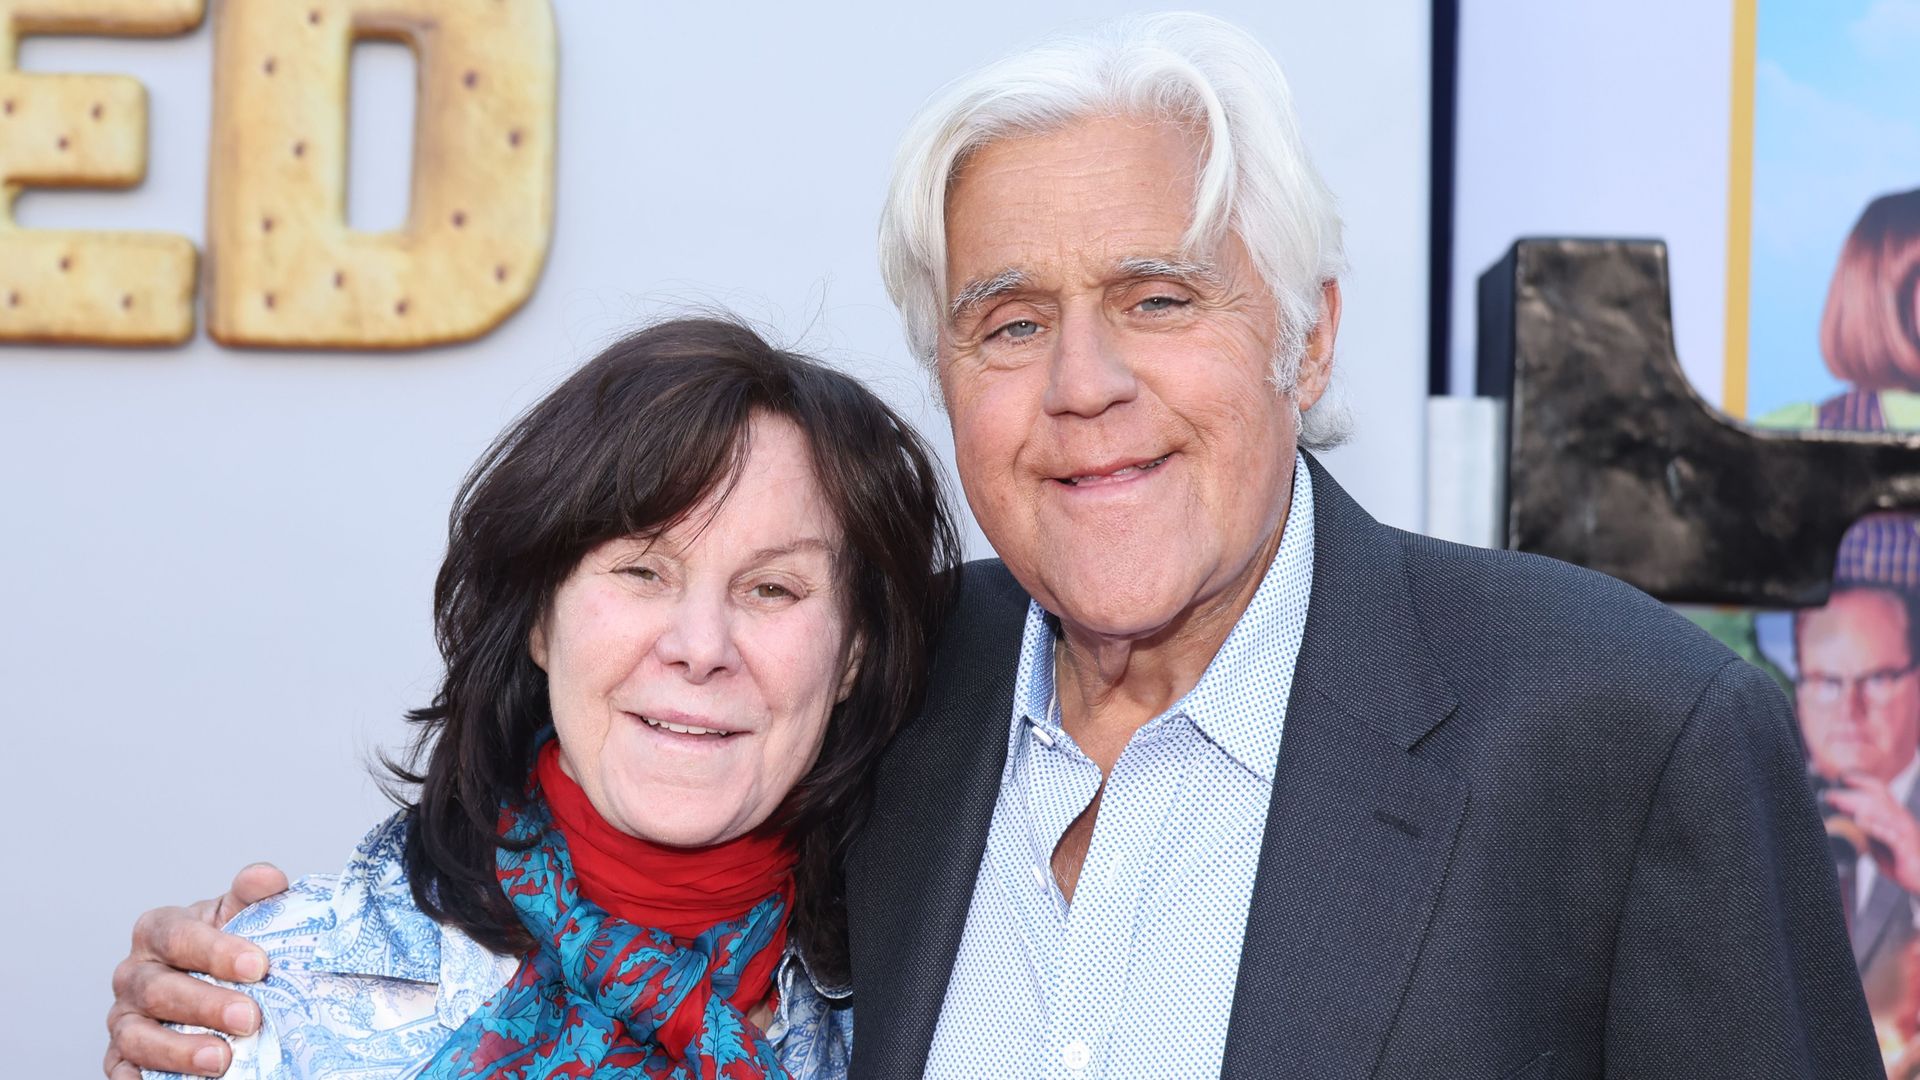 Jay Leno and wife Mavis share rare update on dementia battle and marriage on unexpected date night